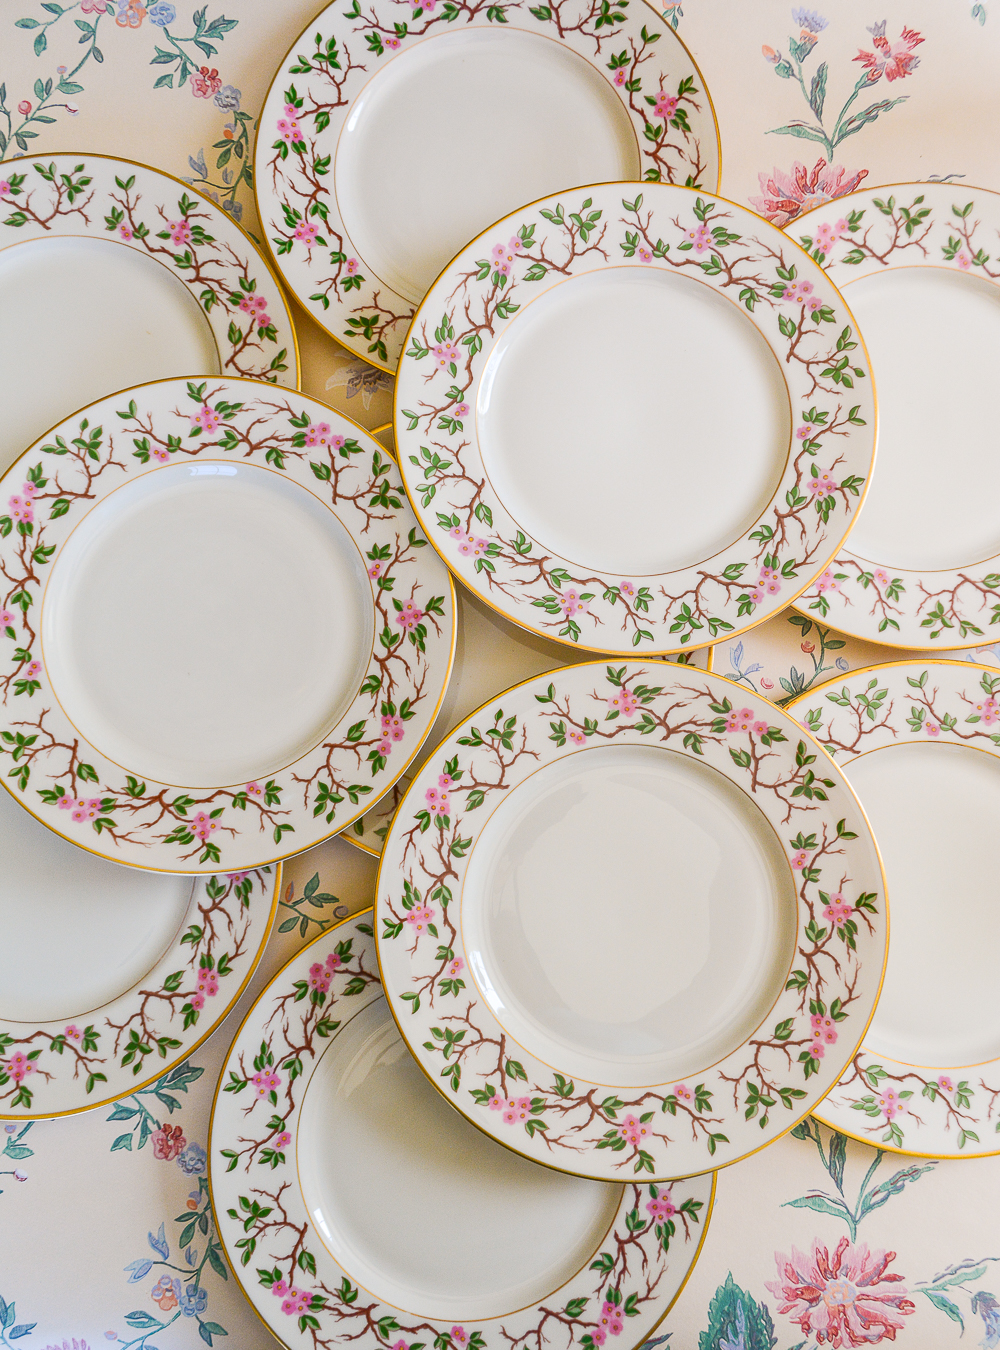 Franciscan Woodside salad plates with pink flowering branches